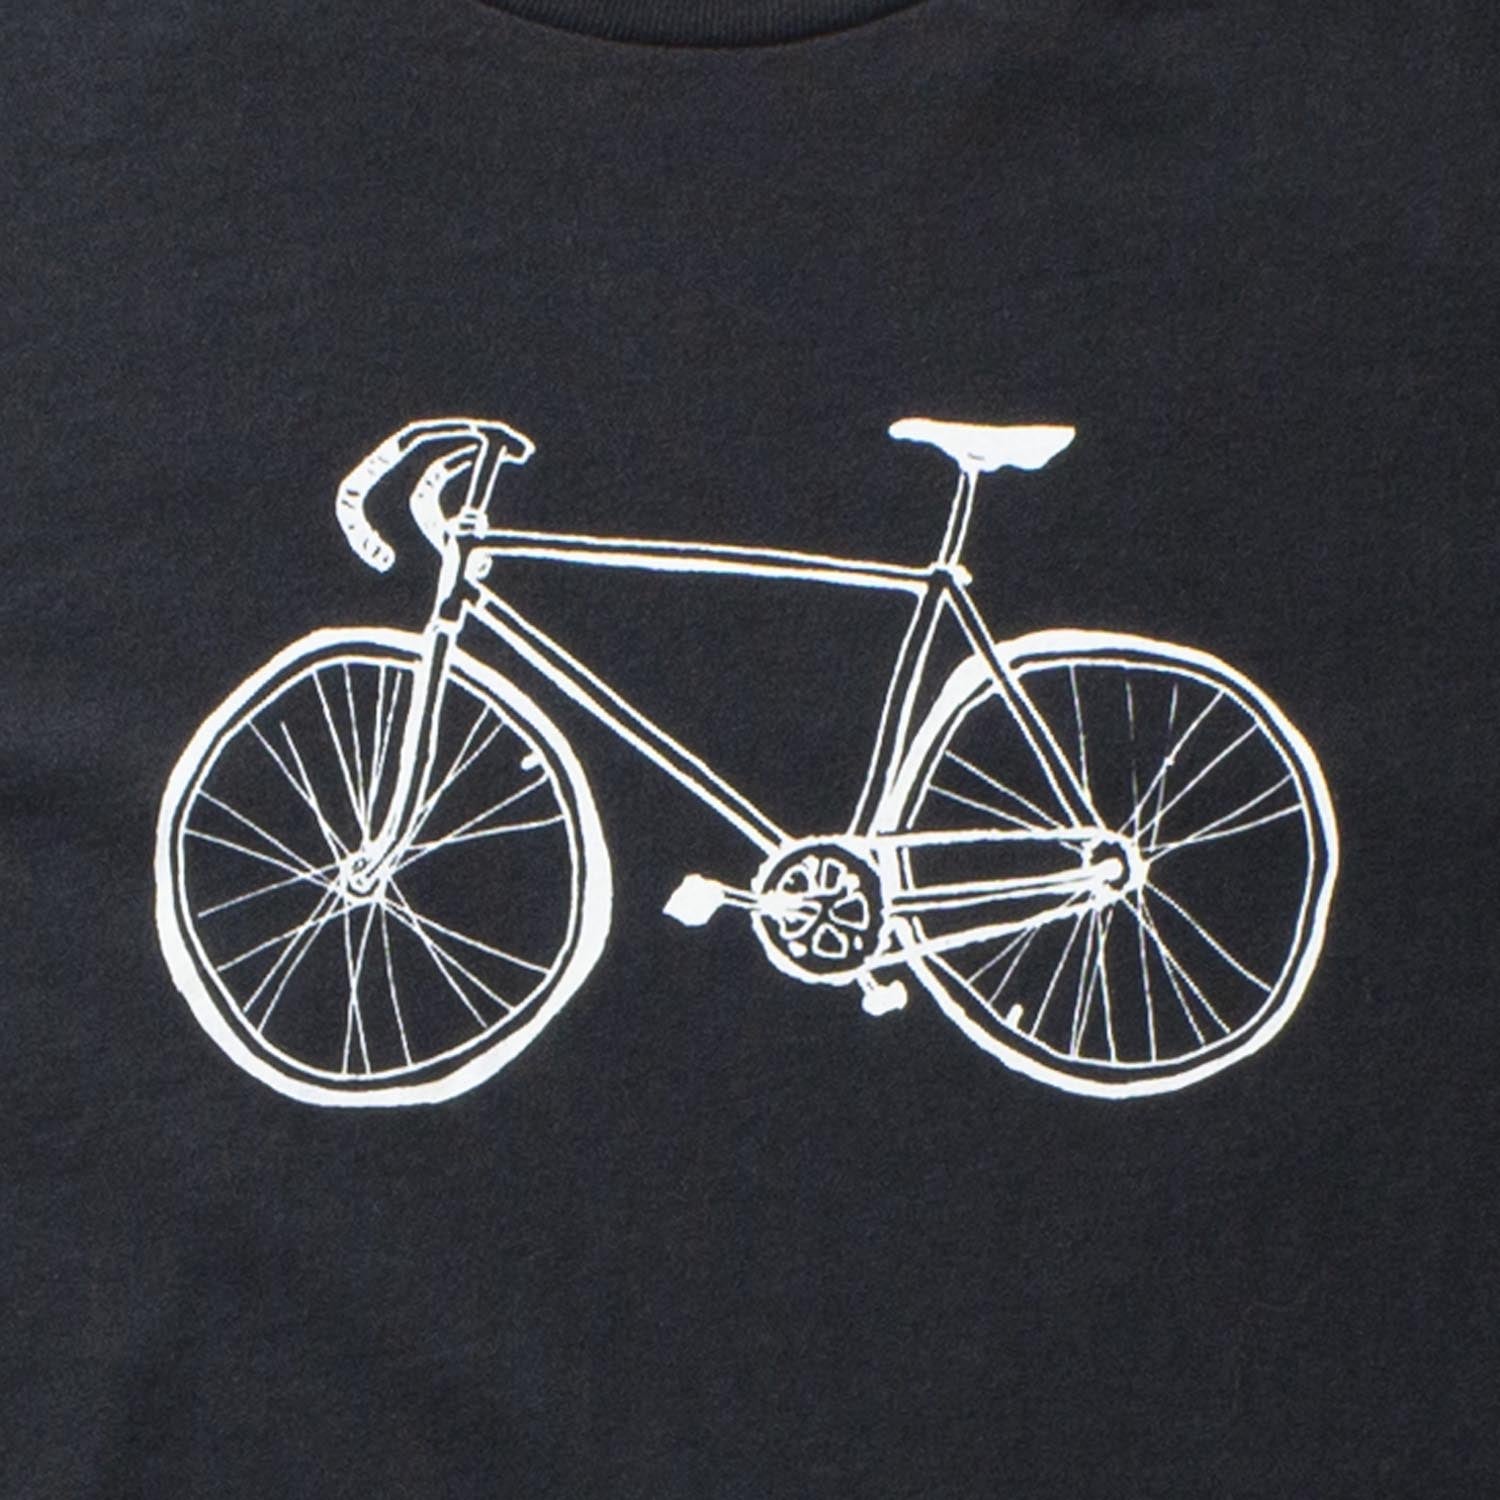 Details of black t-shirt with hand drawn ten speed bicycle in navy. bicycle art, bike art, minnesota, twin cities, minneapolis, st paul, minnesota-themed clothing, clothing, apparel, accessories, gifts, goods, t-shirt, t shirt, tee, t-shirts, t shirts, tees